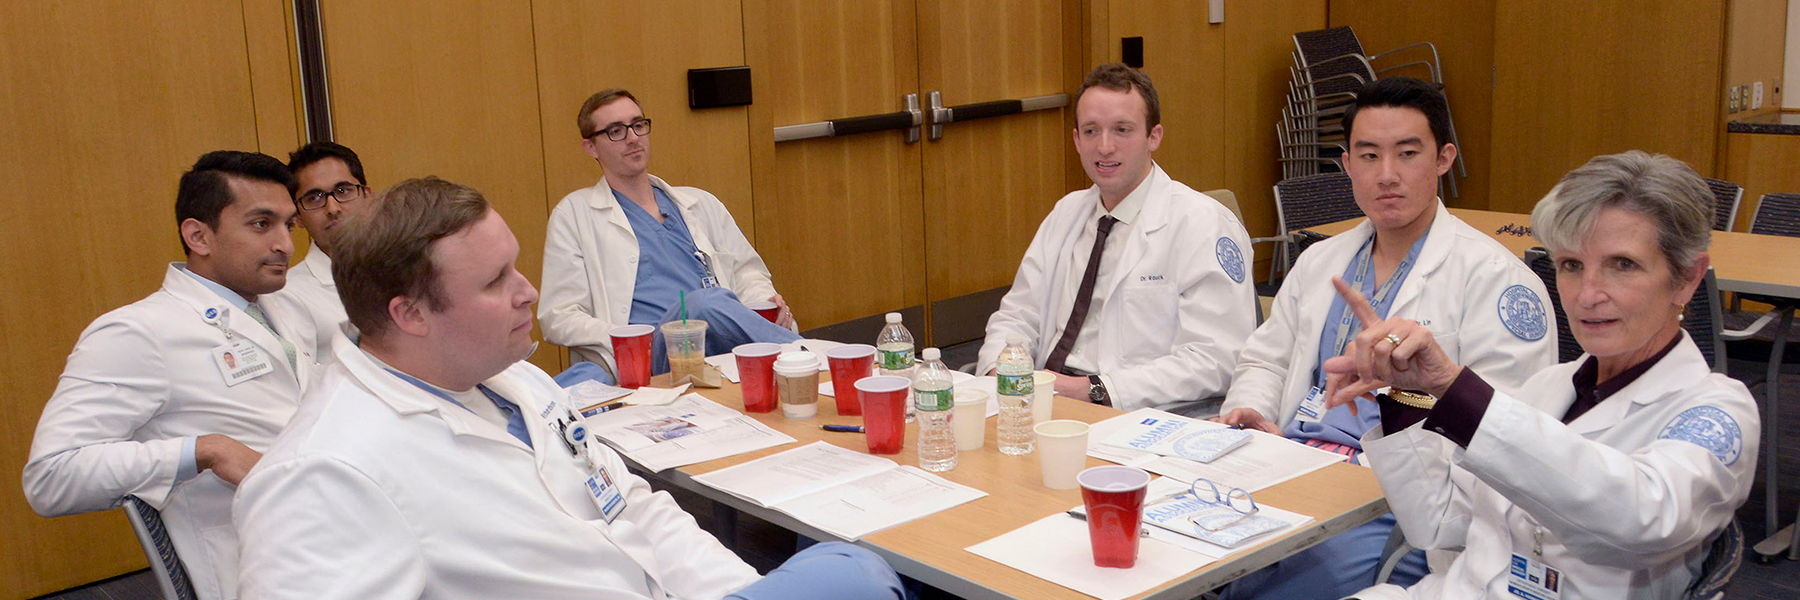 Banner image of Dr. Jo Hannafin leading a discussion with several physicians.